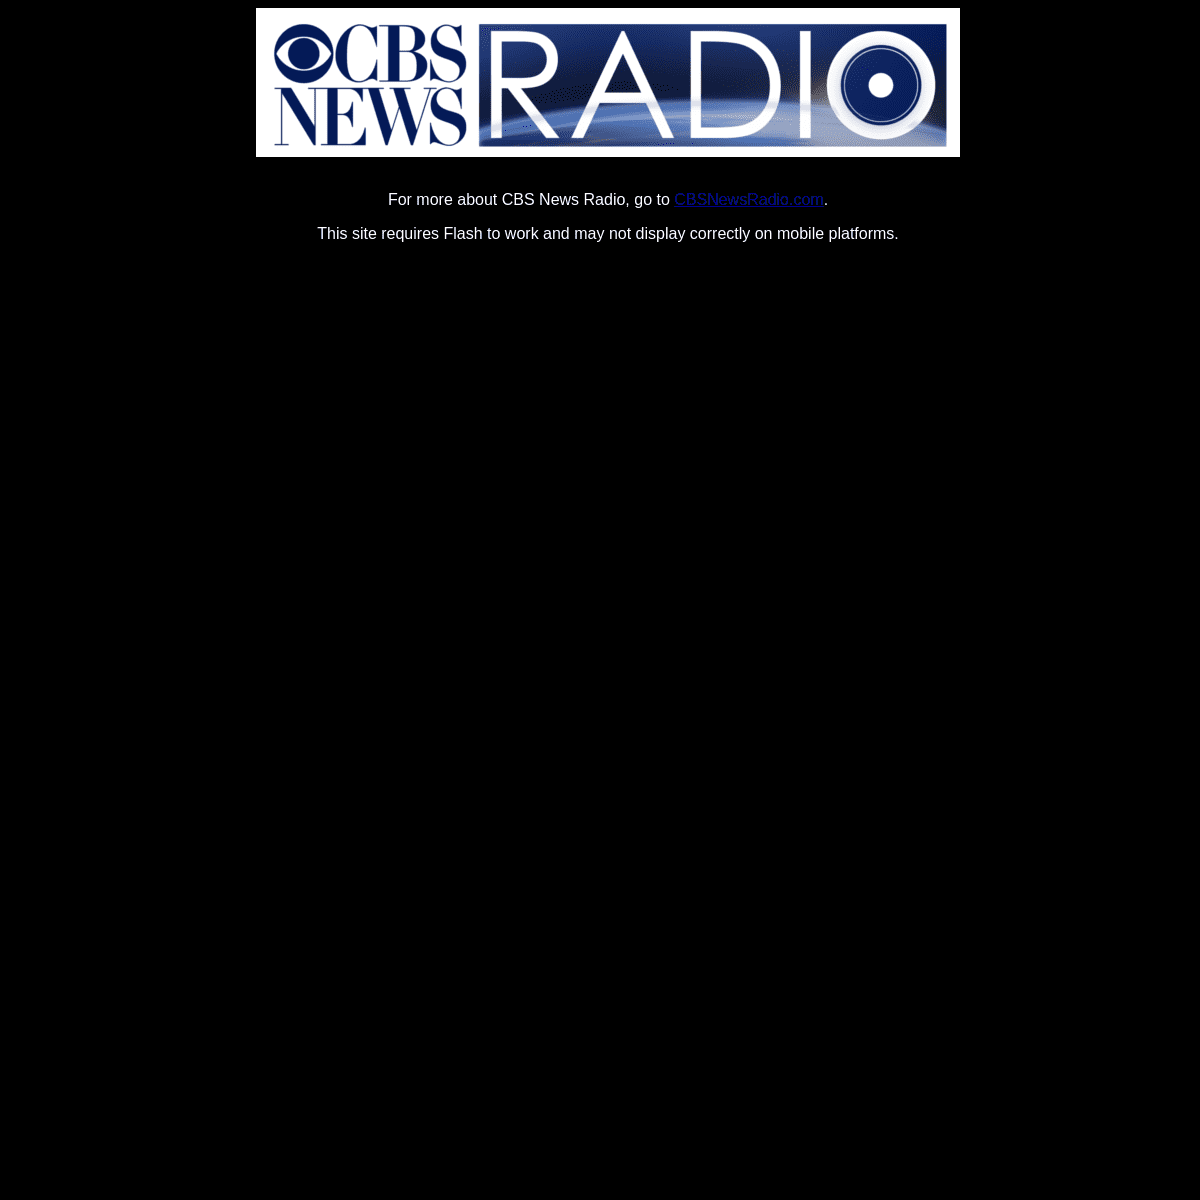 A complete backup of cbsradionewscast.com